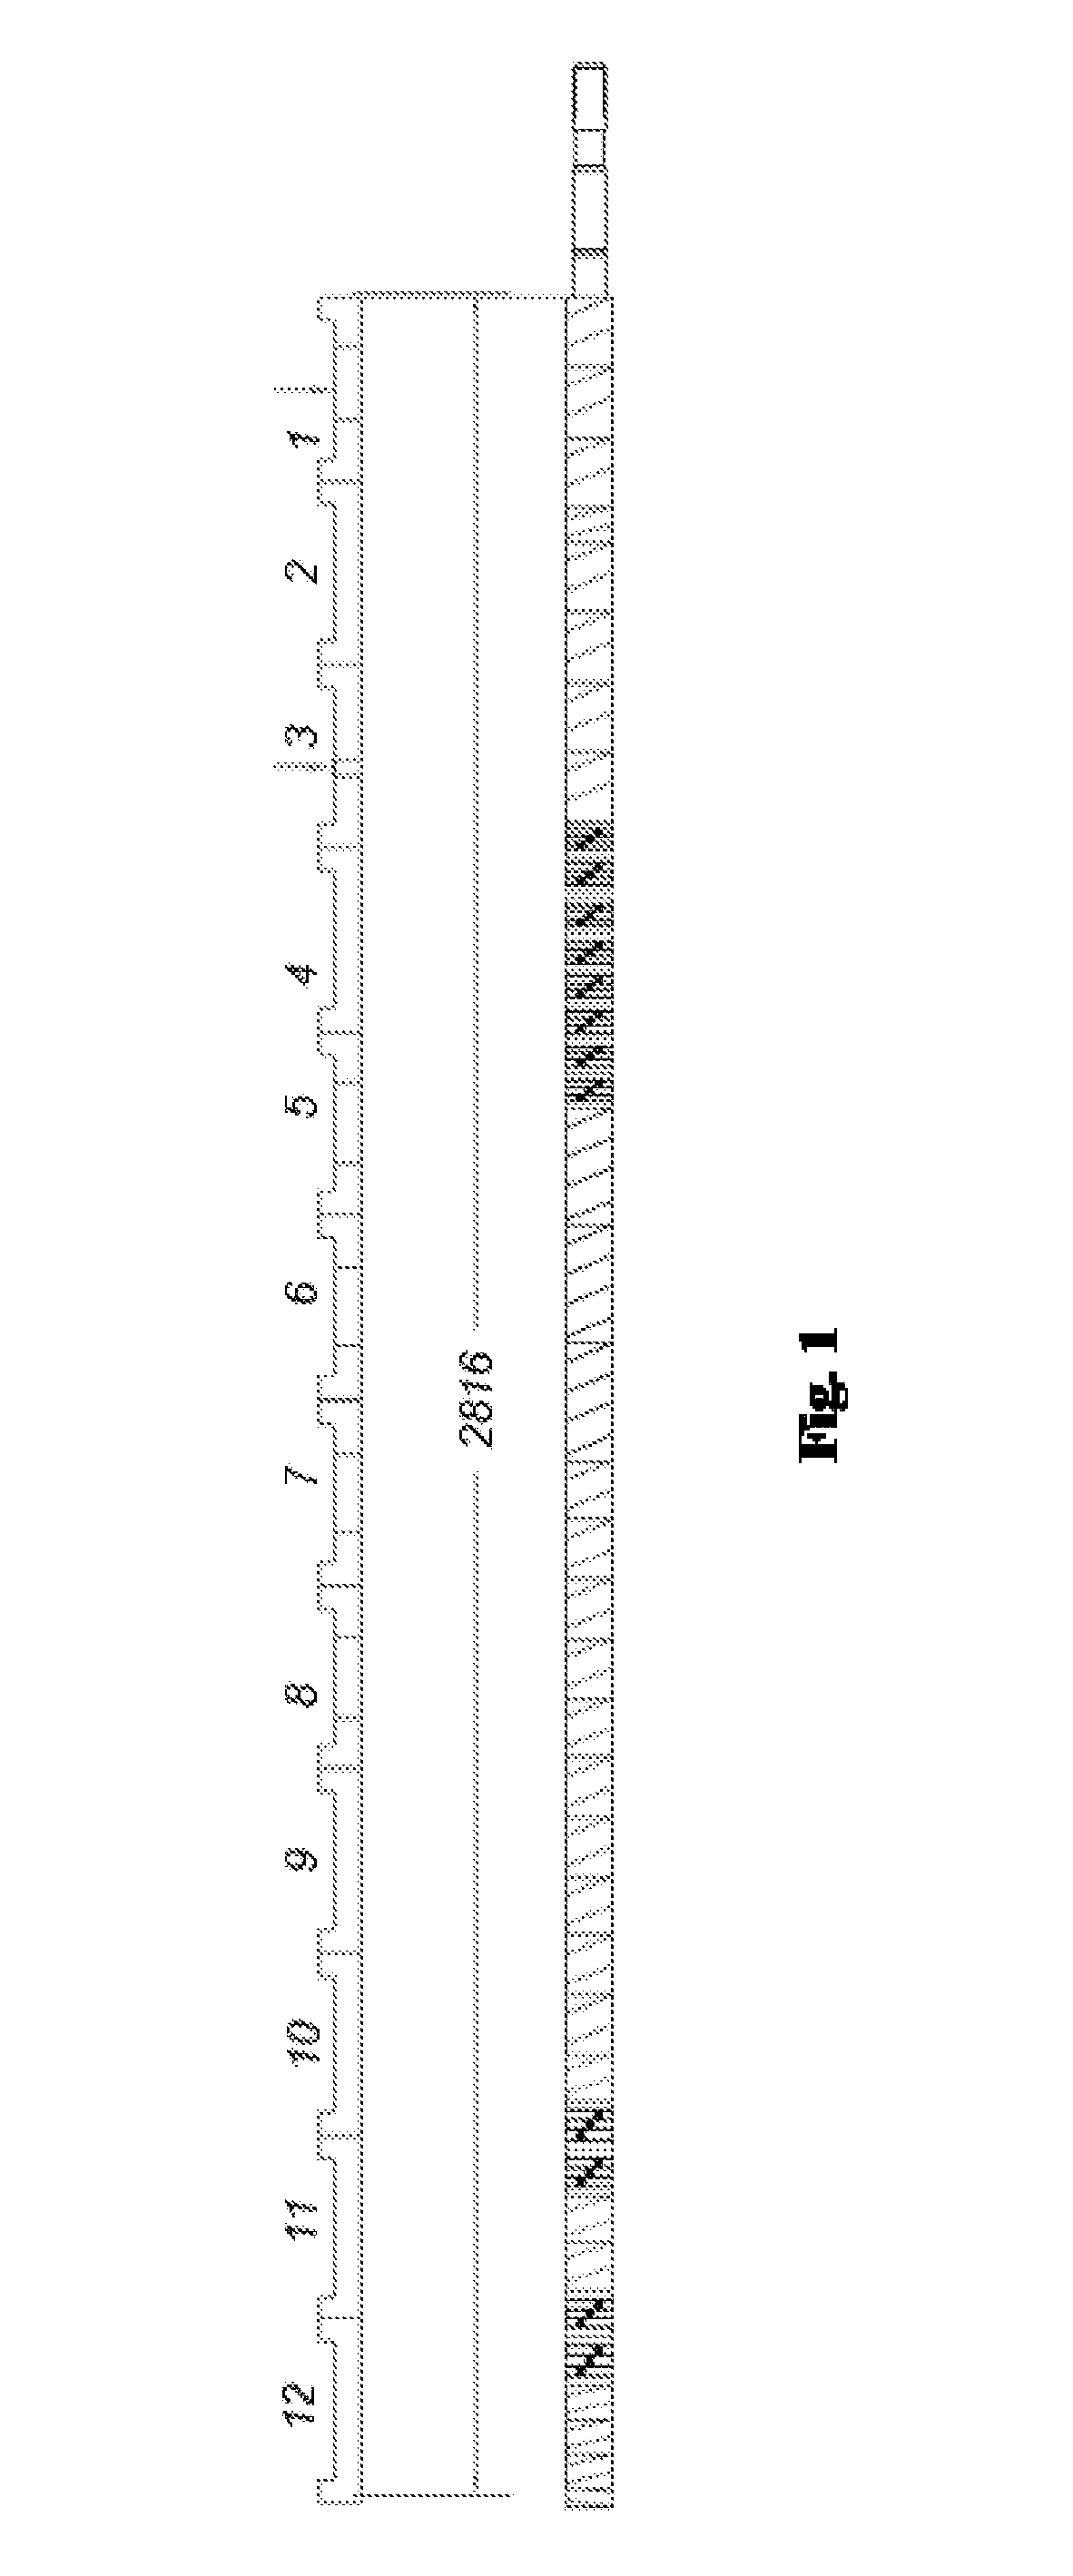 Process for Producing a Powder Comprising an Extruded Carrier With an Active Compound